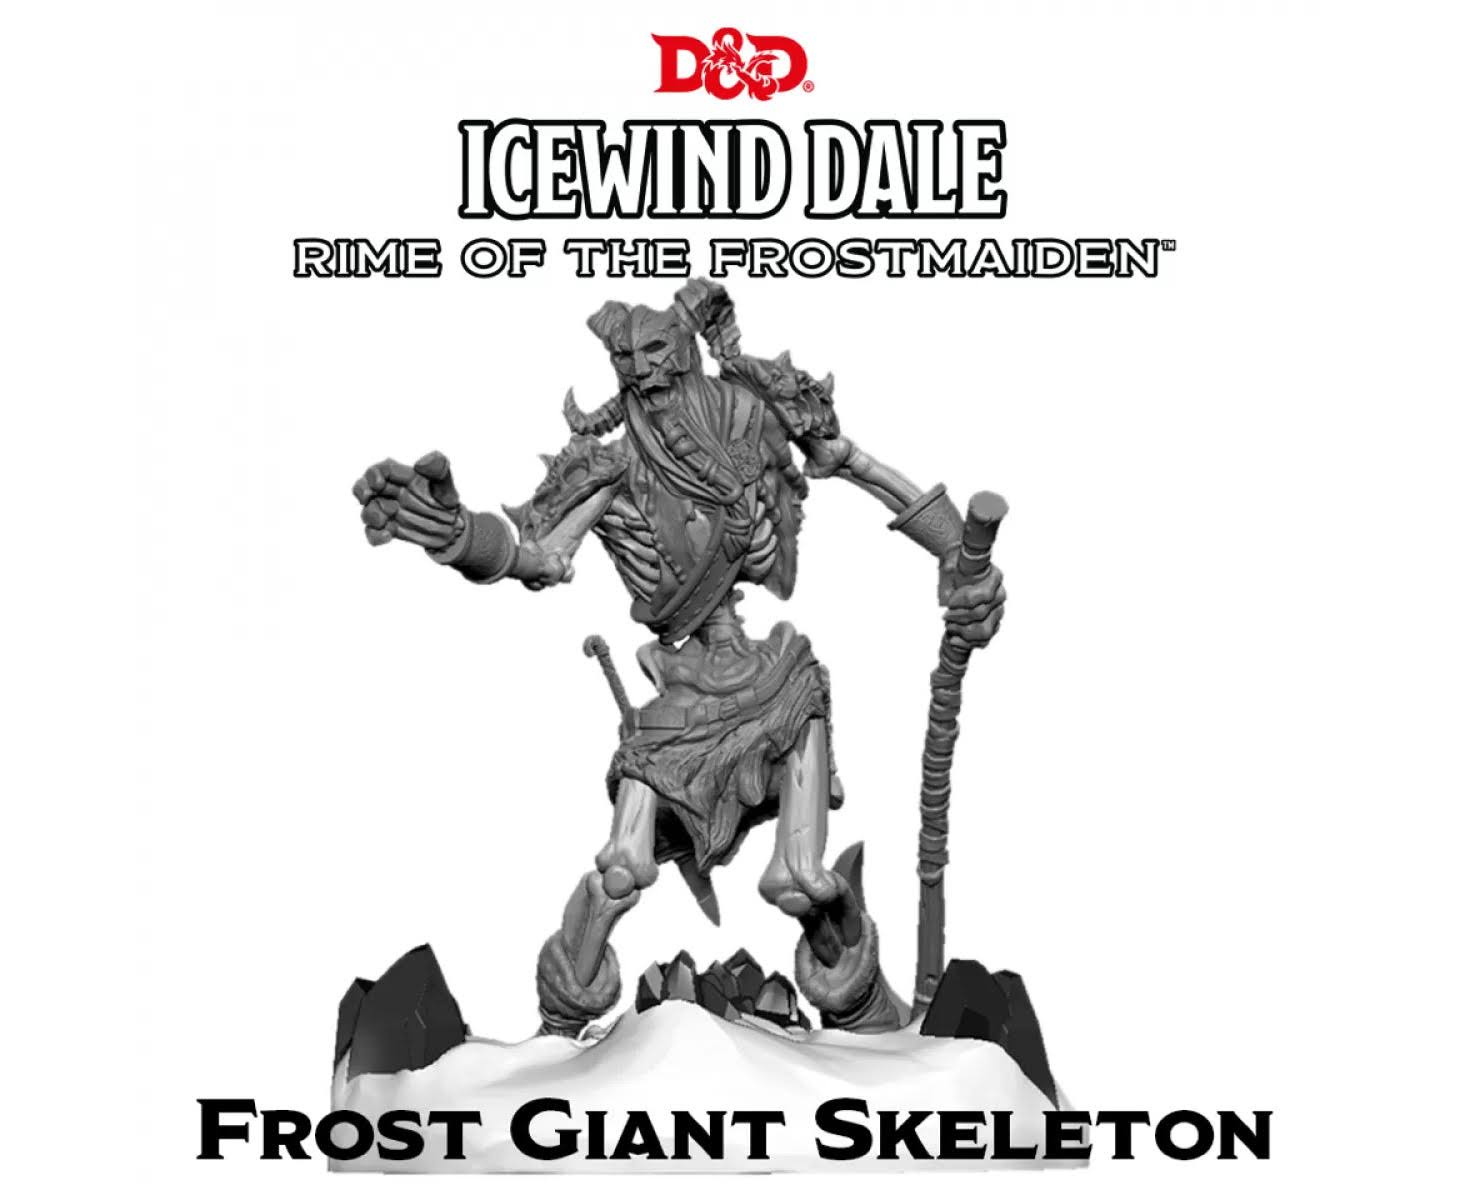 D&D Icewind Dale Rime of The Frostmaiden Frost Giant Skeleton